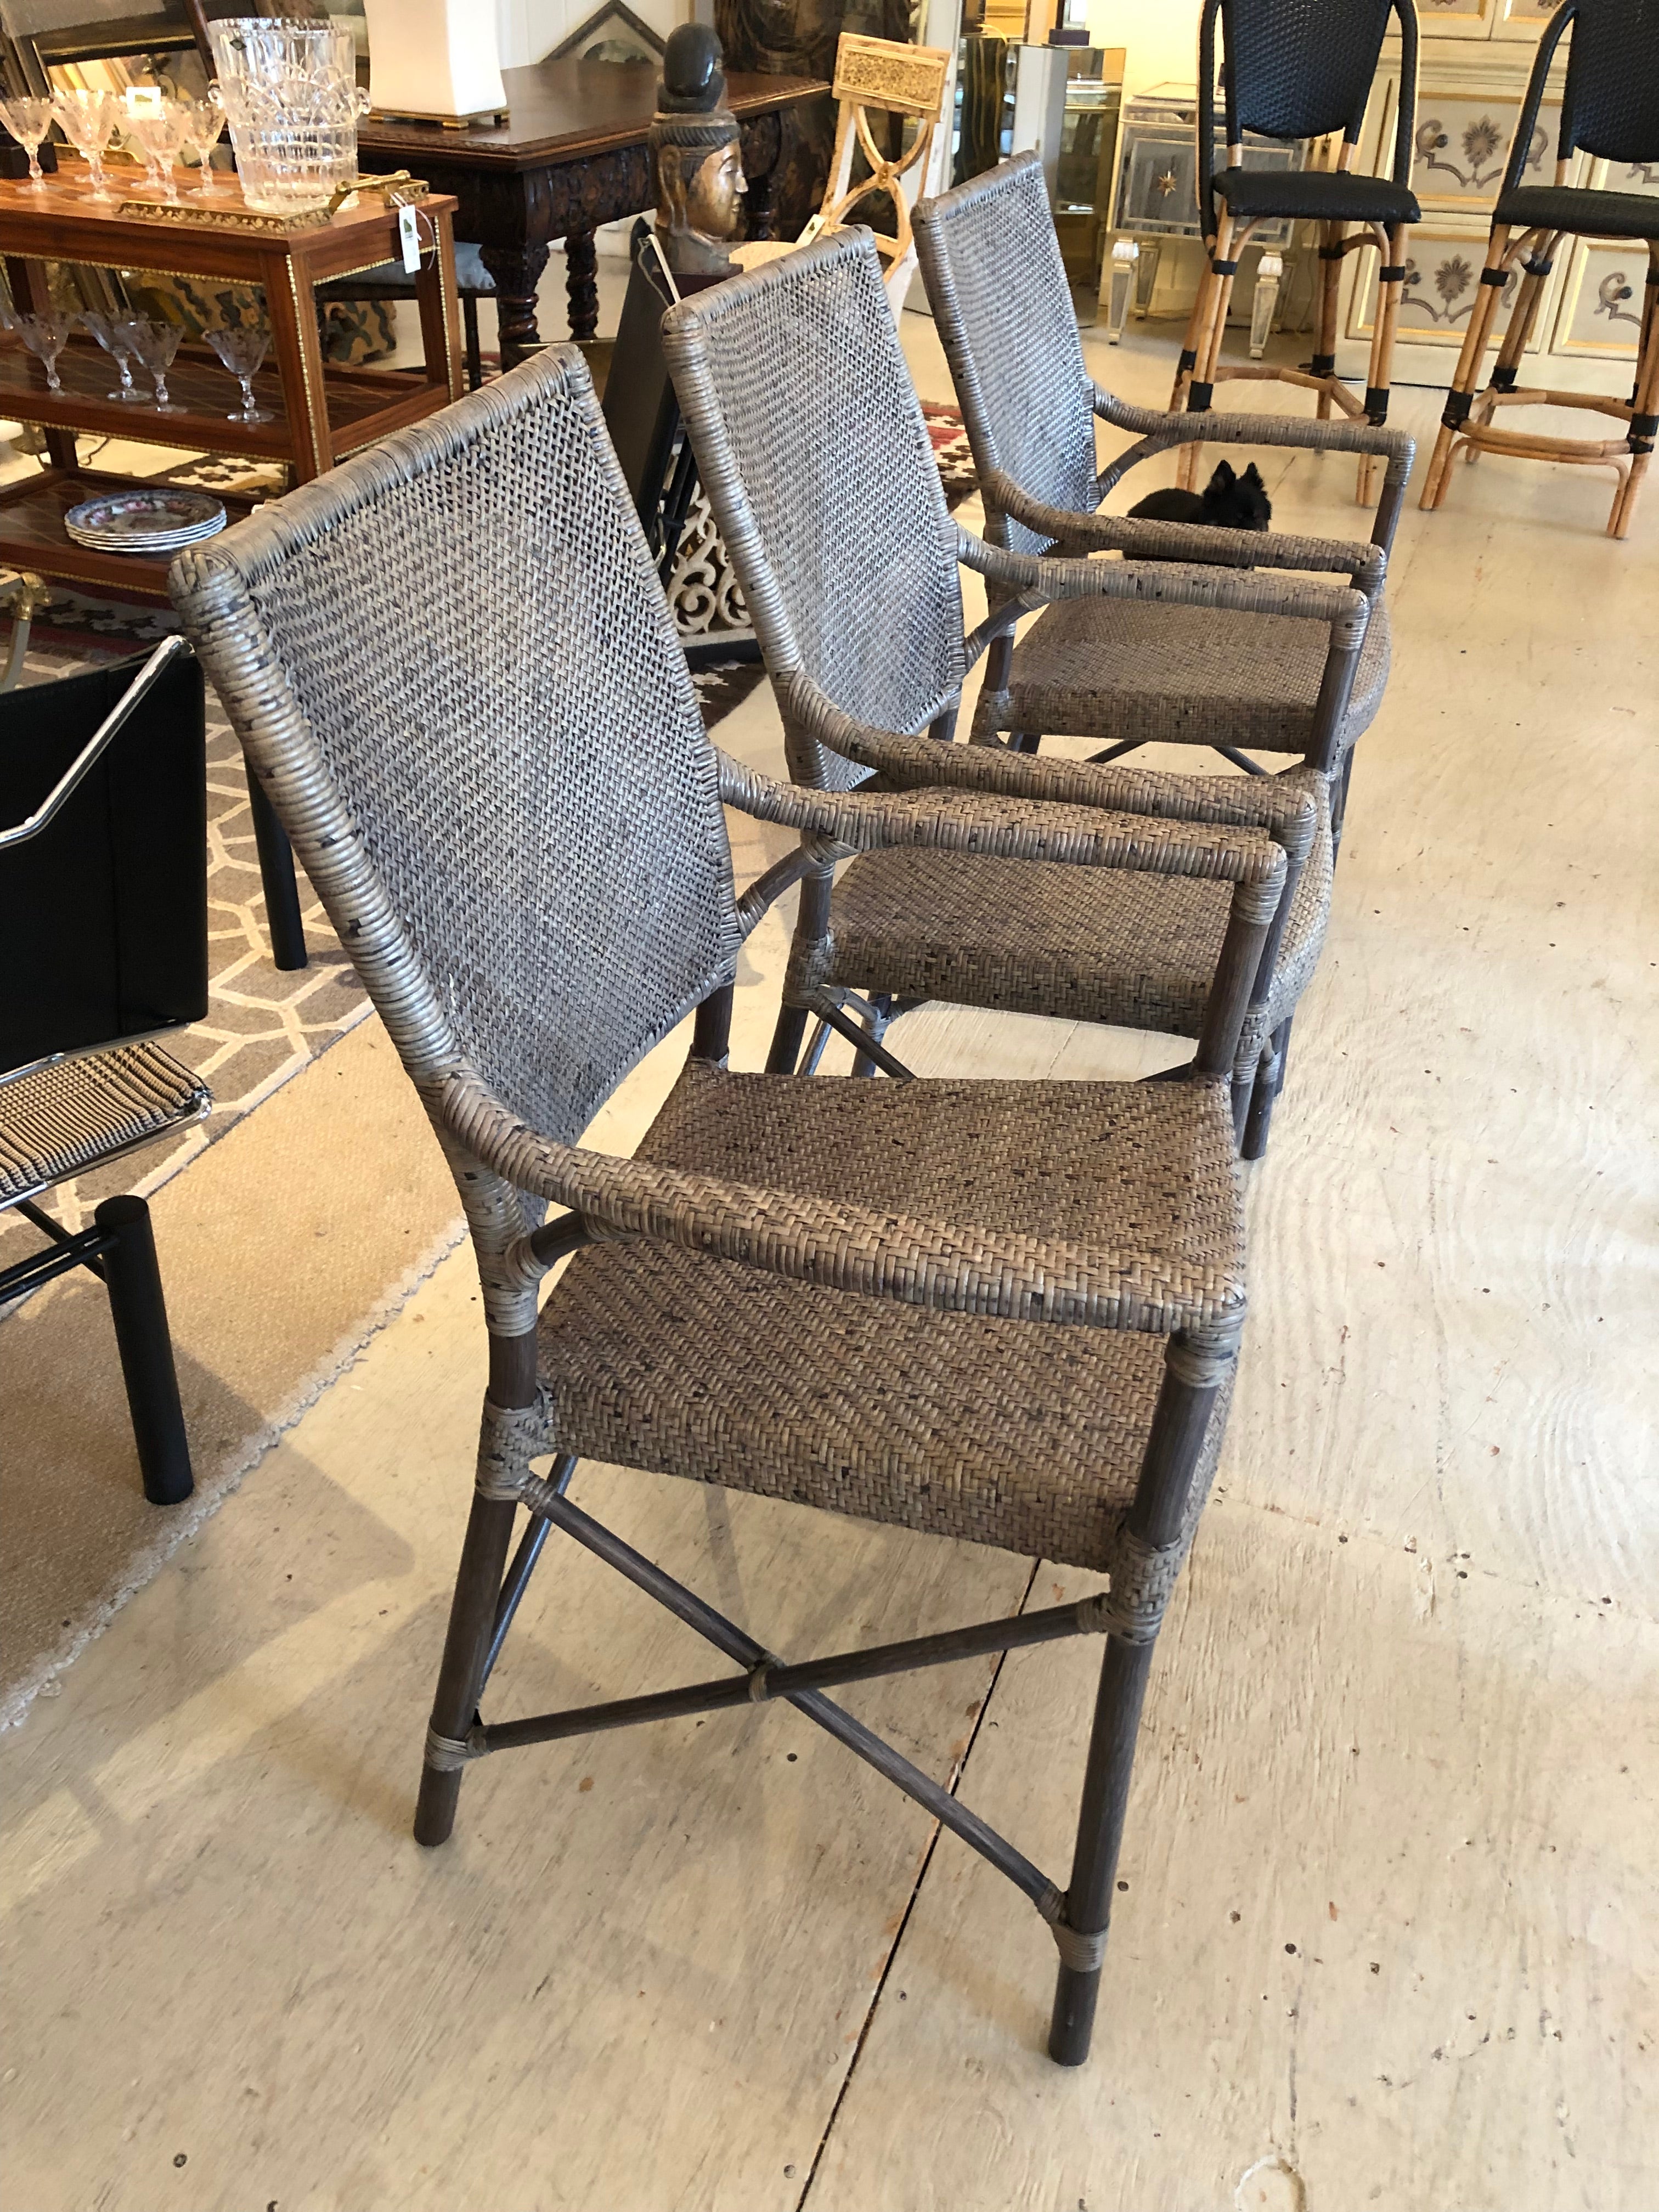 Classic light weight woven rattan armchairs having wood legs and stretcher to match in a handsome shade of taupe.
Set of 3

Measures: arm height 25.
 